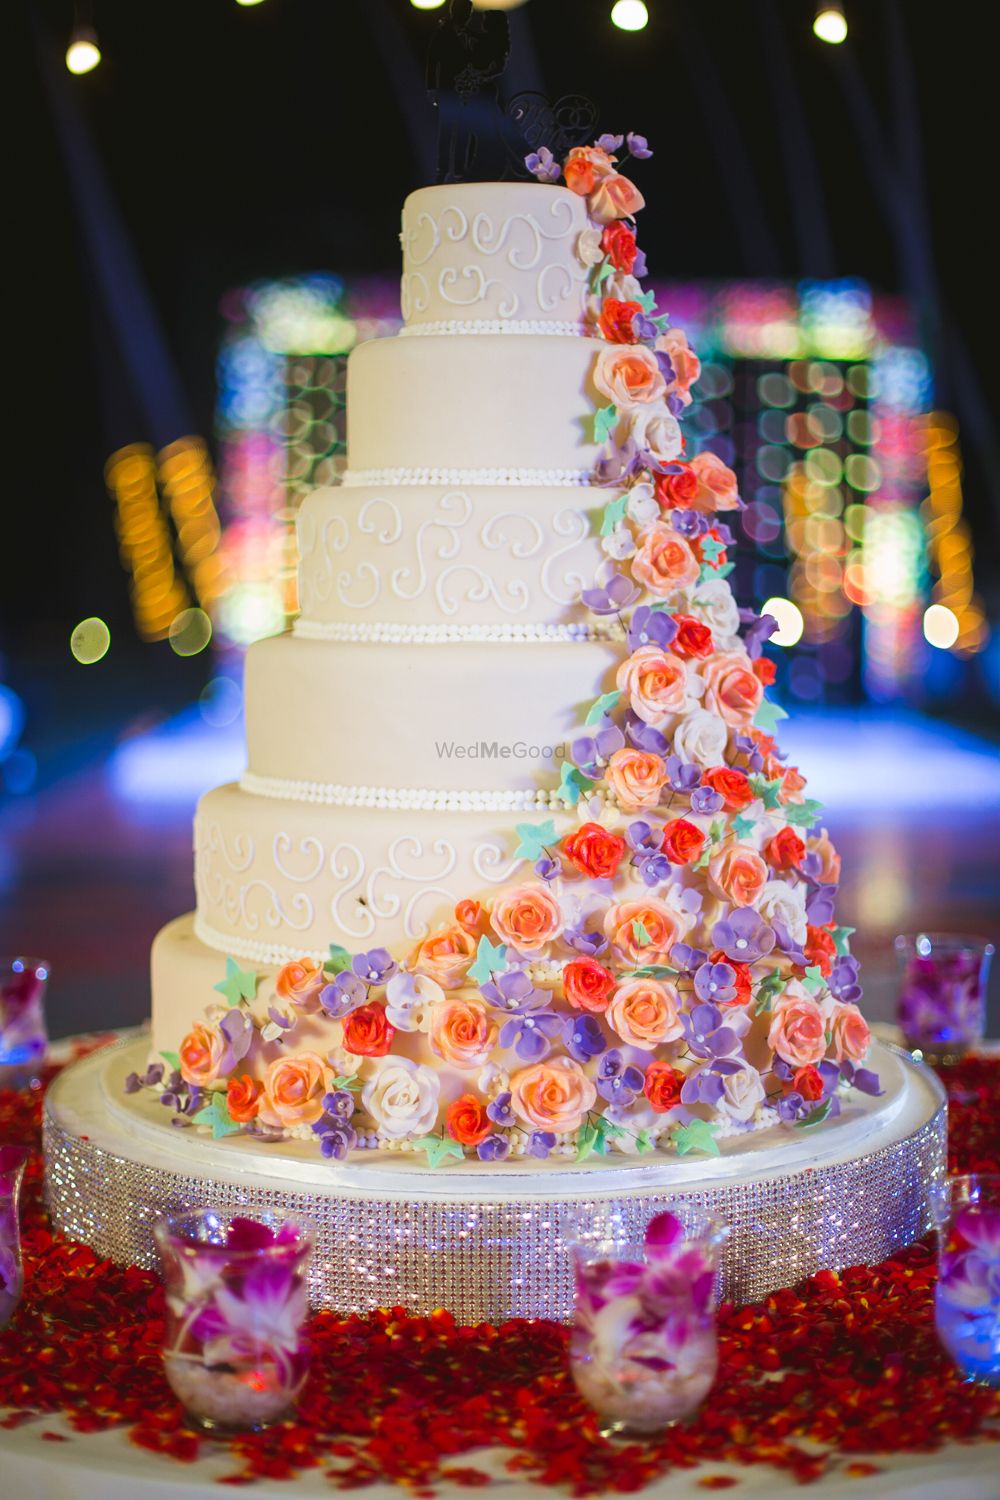 Photo of Colorful cakes on 6 tier white wedding cake